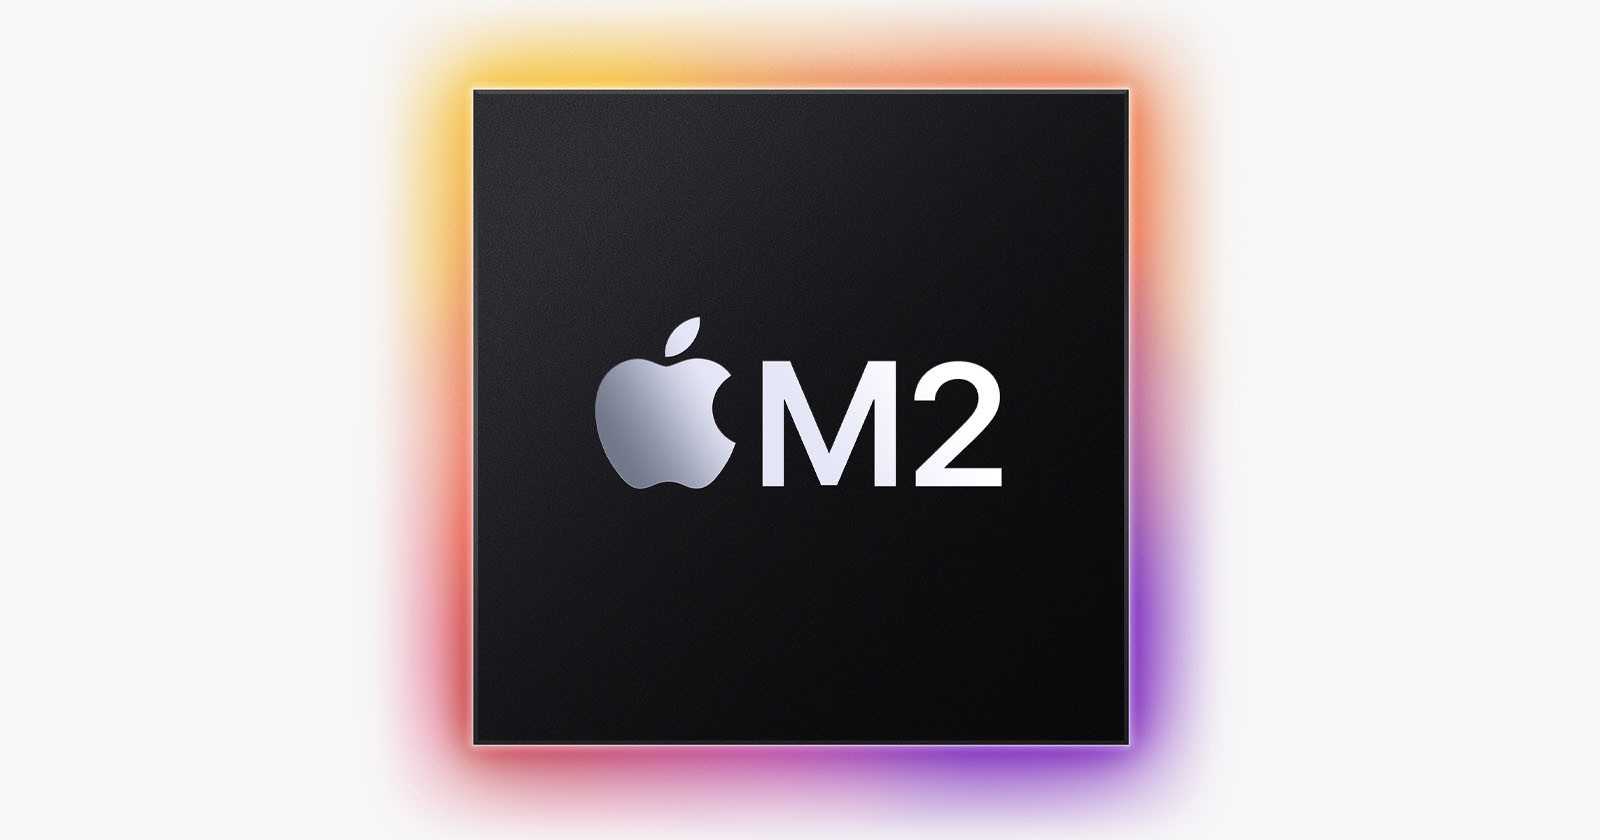 Apple Announces the More Powerful and Efficient M2 Processor